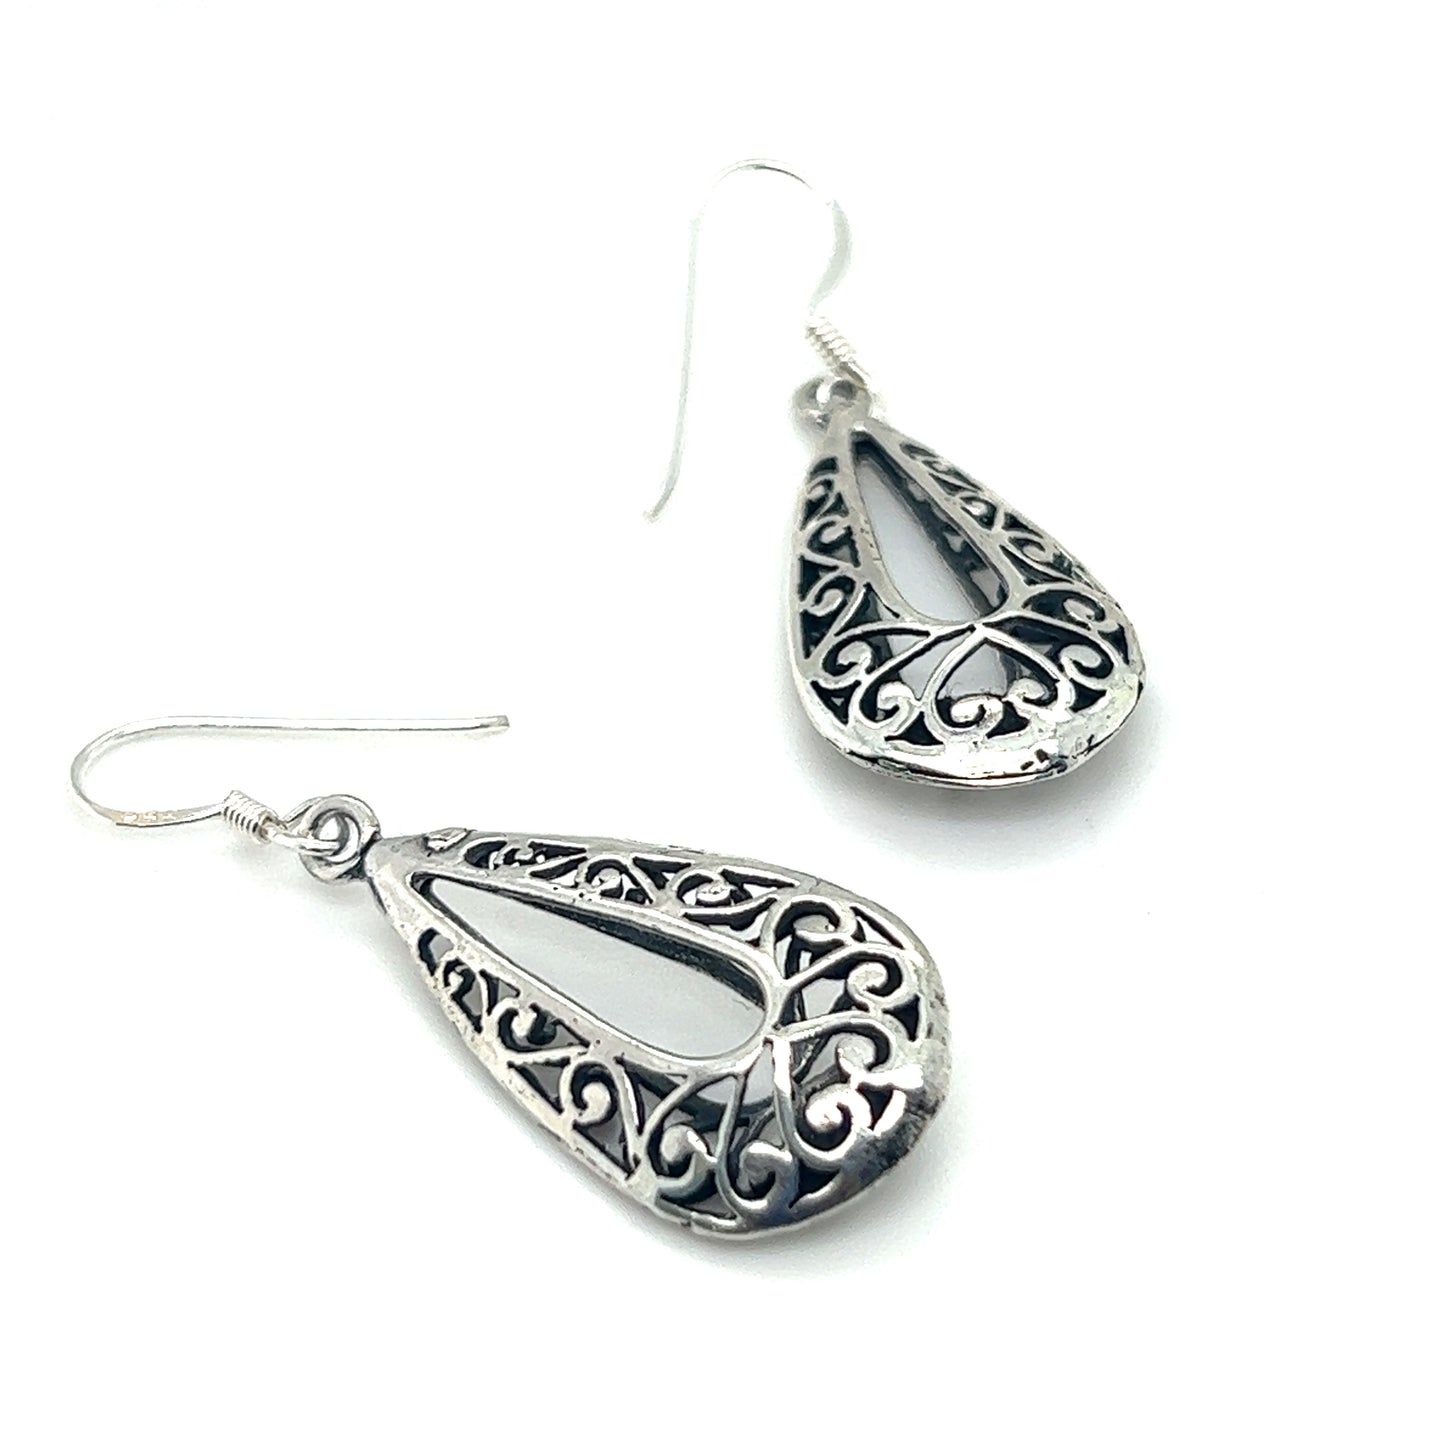 A pair of Super Silver Filigree Teardrop Earrings with Open Center.